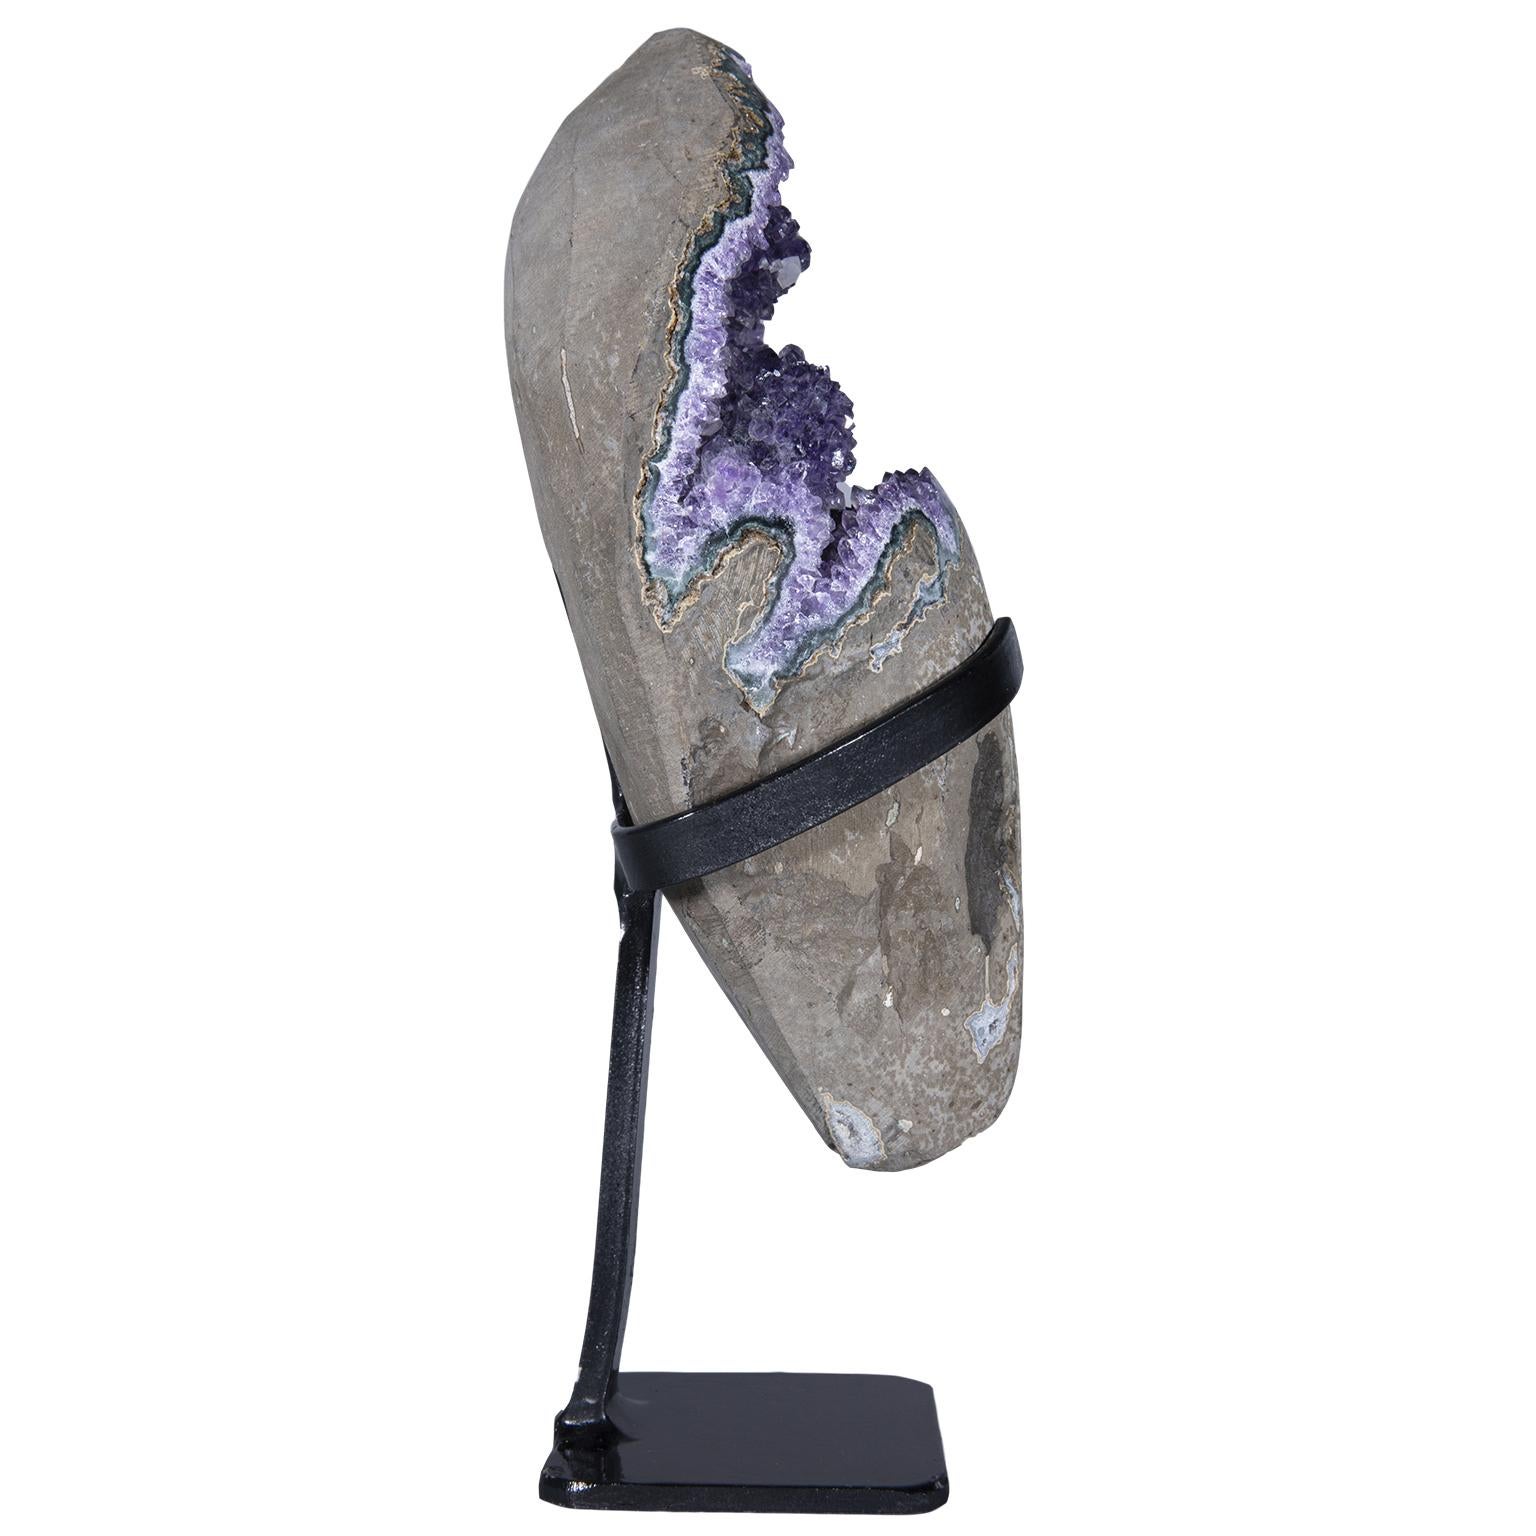 A stunning rough amethyst sculpture with calcite crystals.

The exquisite amethyst cluster has an exquisite deep purple color combined with green celadonite, blue-grey agate and white quartz.

To further add to its beauty, this piece has calcite